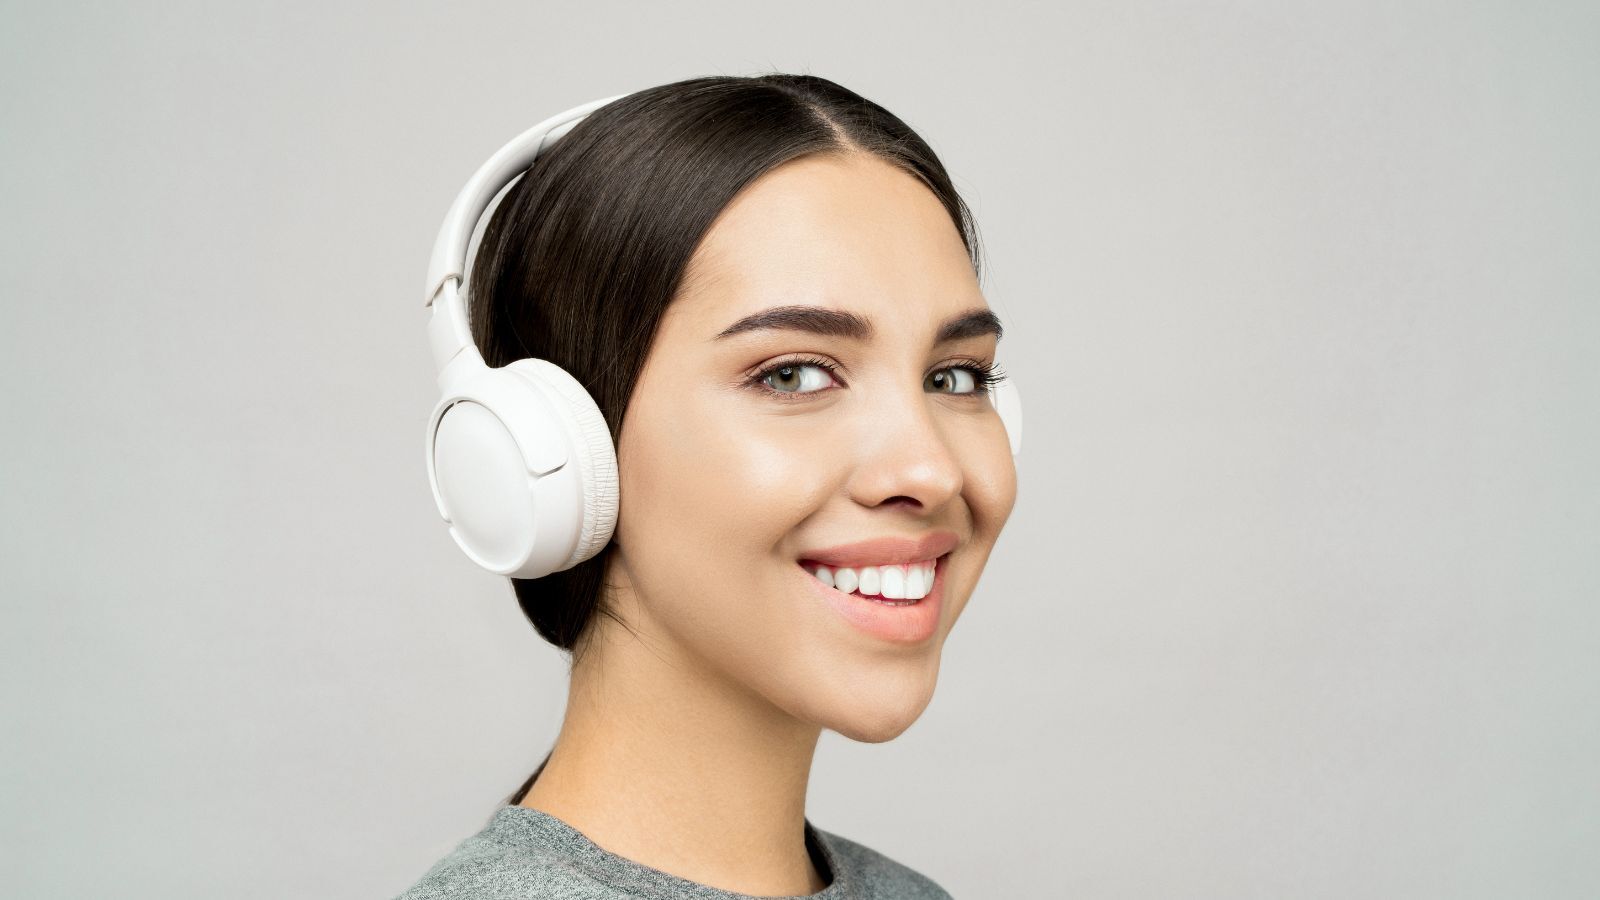 How to Avoid Headphone Hair and Hair Loss? (Must Be Taken Seriously!)